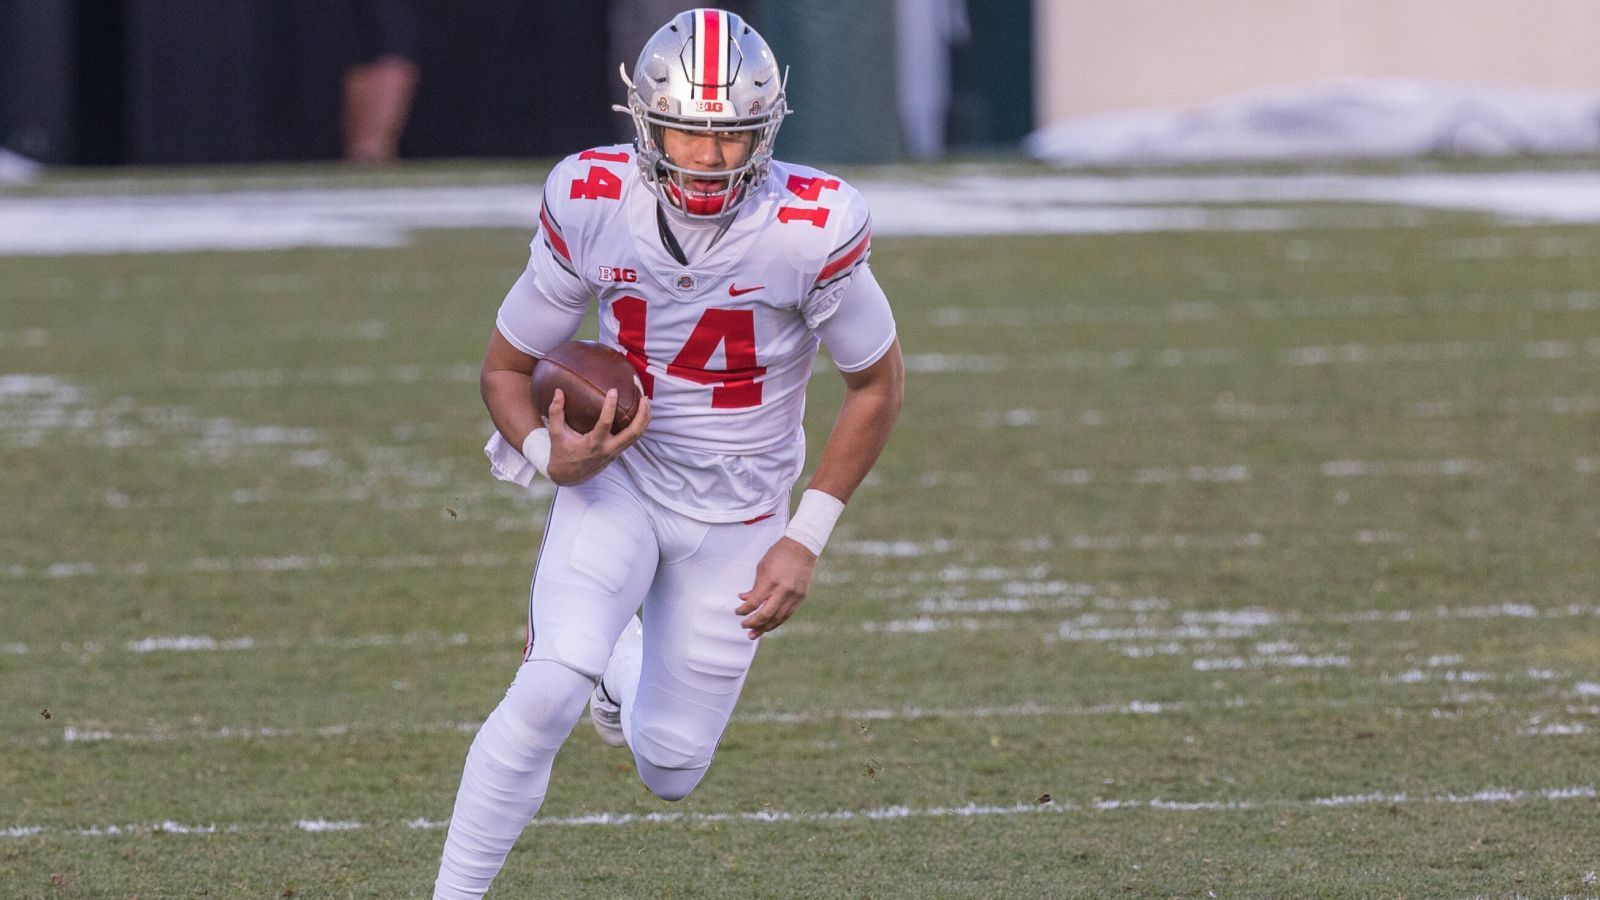 
                <strong>Platz 5: C.J. Stroud</strong><br>
                &#x2022; Position: Quarterback -<br>&#x2022; College: Ohio State -<br>&#x2022; Quote: 14,0<br>
              